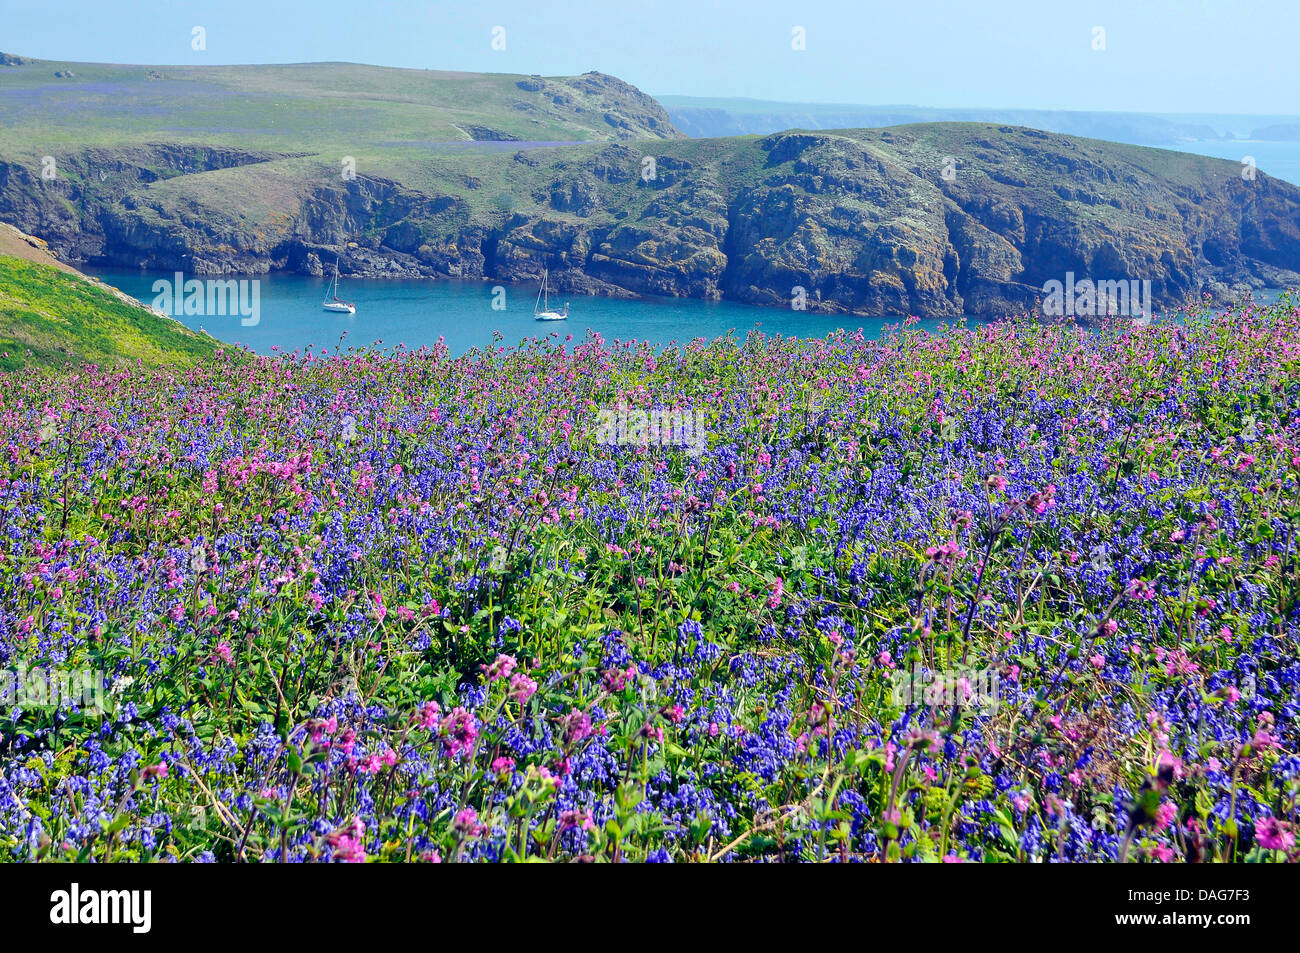 Atlantic bluebell (Hyacinthoides non-scripta, Endymion non-scriptus, Scilla non-scripta), Panoramic of Skomer island off the Pembrokeshire coast, Wales, UK. The island is famouse for its bird life and flowers and is a nature reserve, Here during May the are carpets of Bluebells and thousands of Puffins nesting. Tourists are allowed on the isla, United Kingdom, Wales, Pembrokeshire Stock Photo